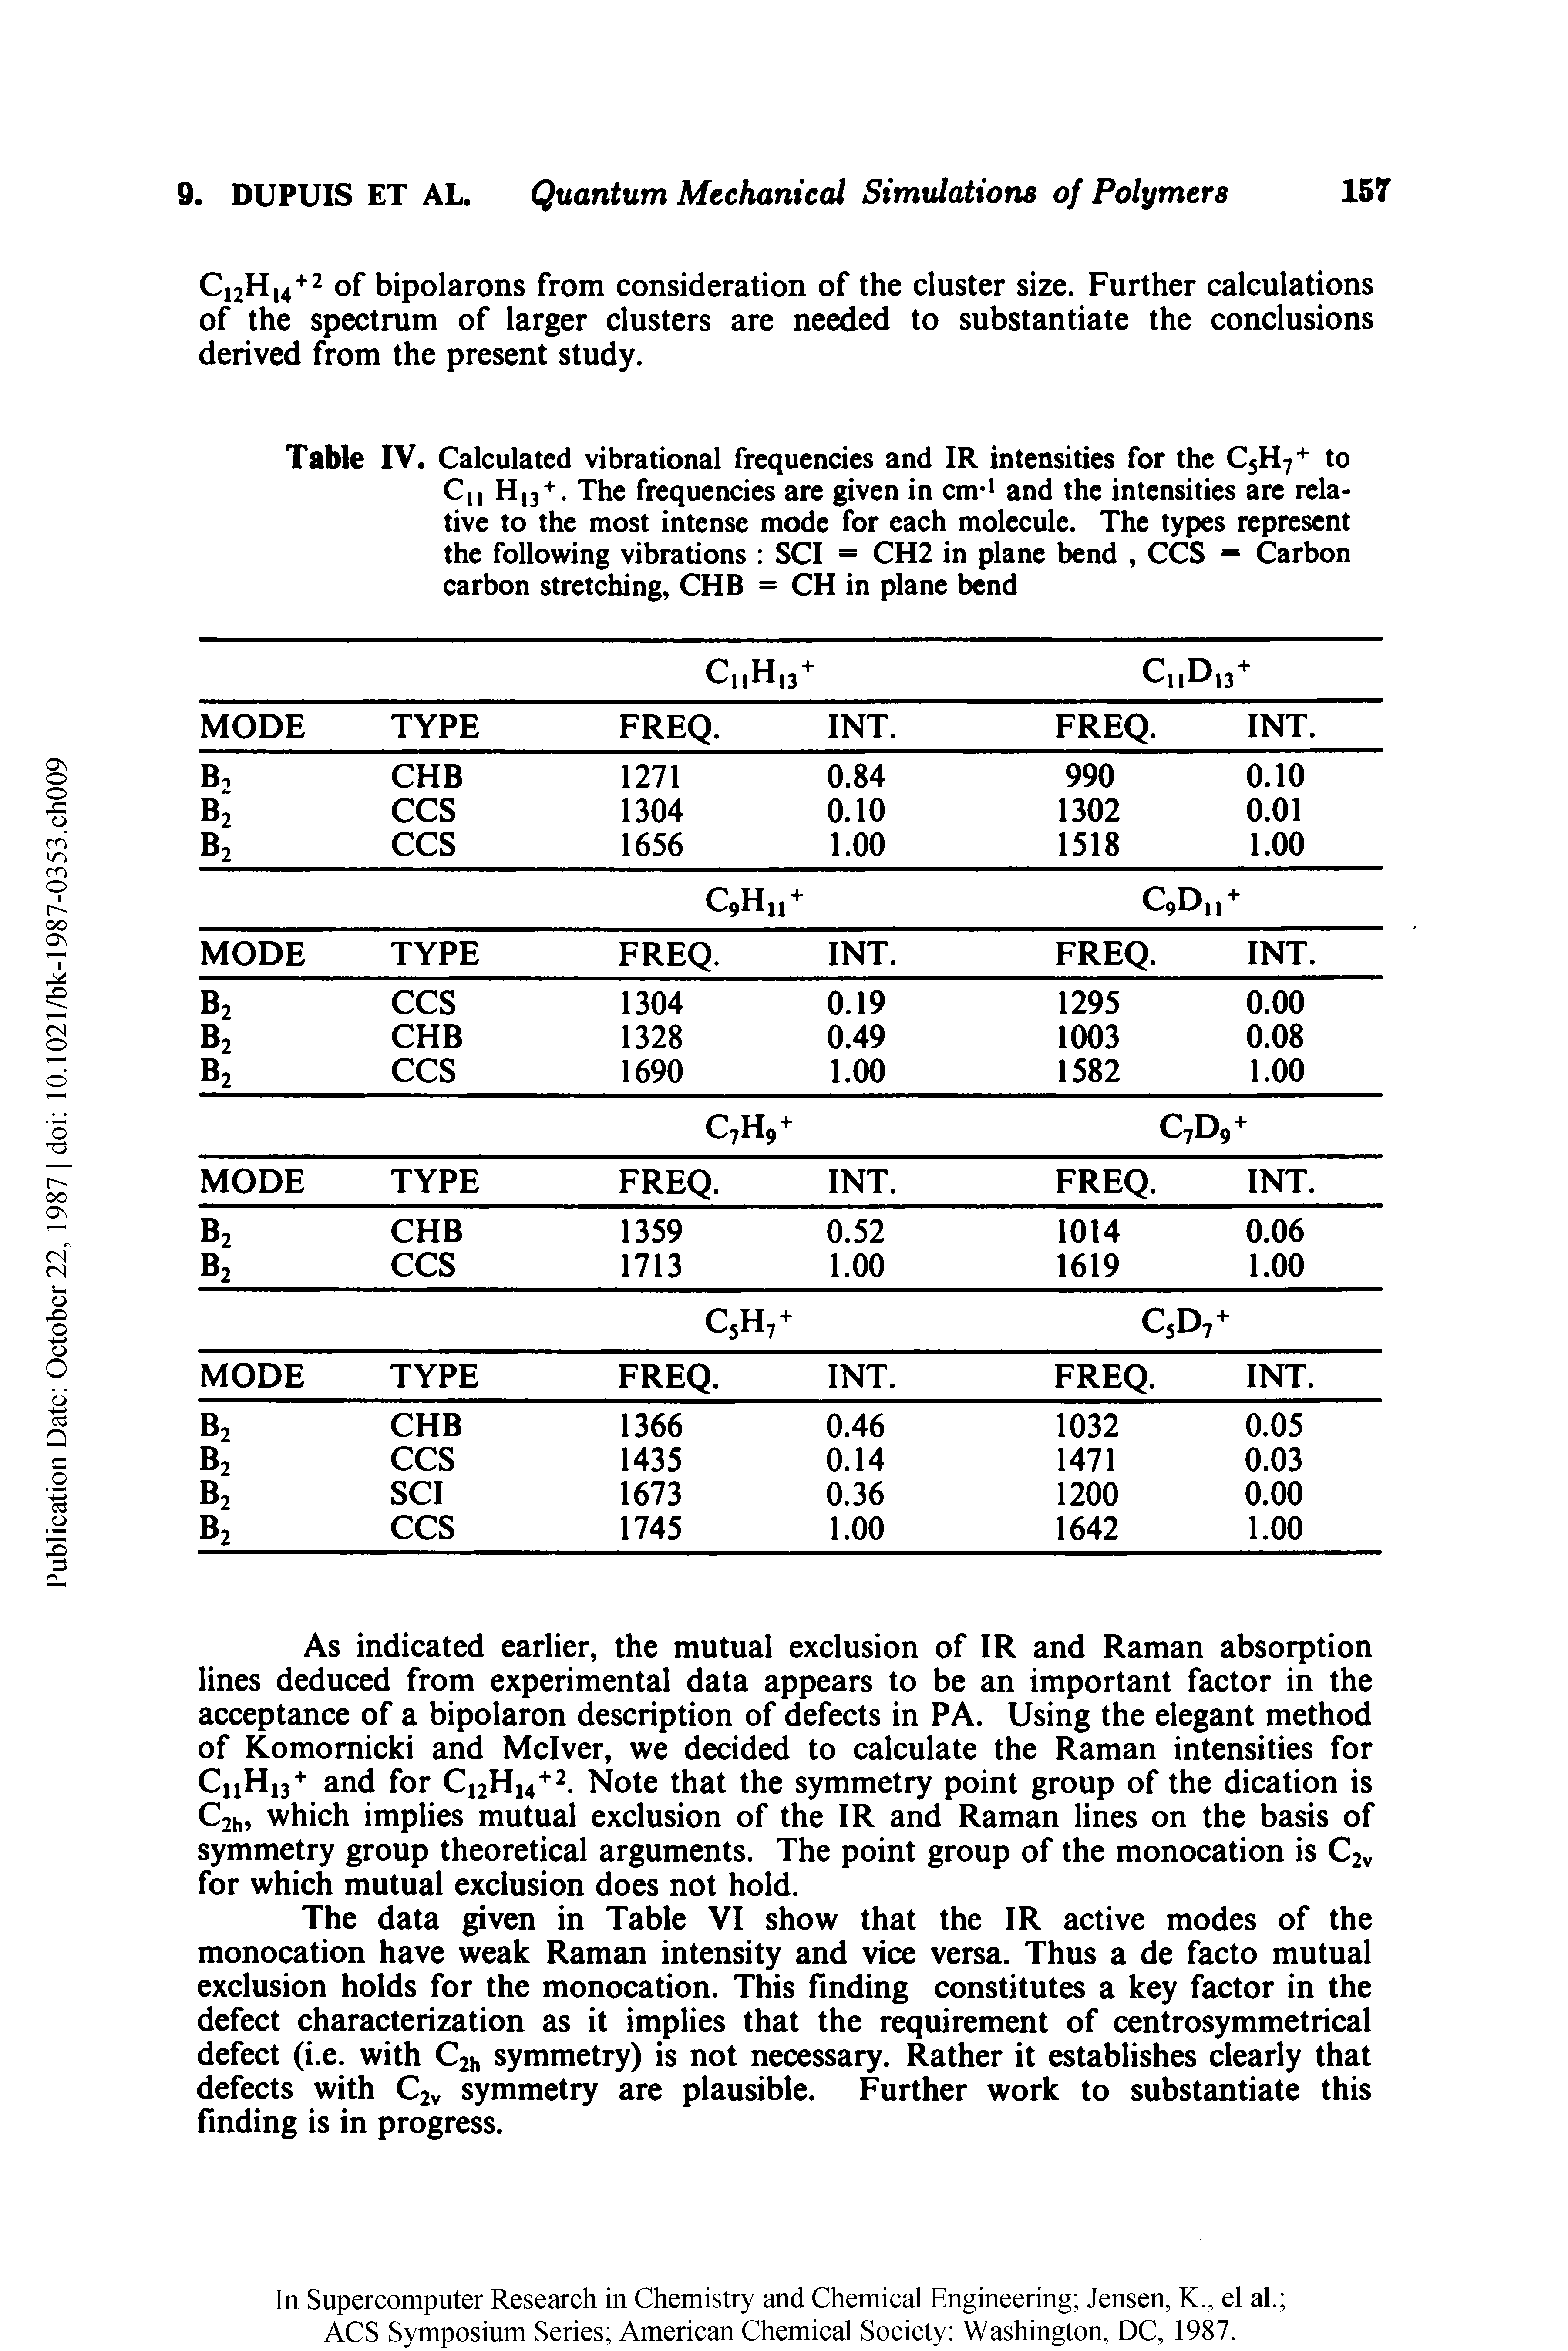 Table IV. Calculated vibrational frequencies and IR intensities for the C5H7 to C H,3 The frequencies are given in cm > and the intensities are relative to the most intense mode for each molecule. The types represent the following vibrations SCI CH2 in plane bend, CCS = Carbon carbon stretching, CHB = CH in plane bend...